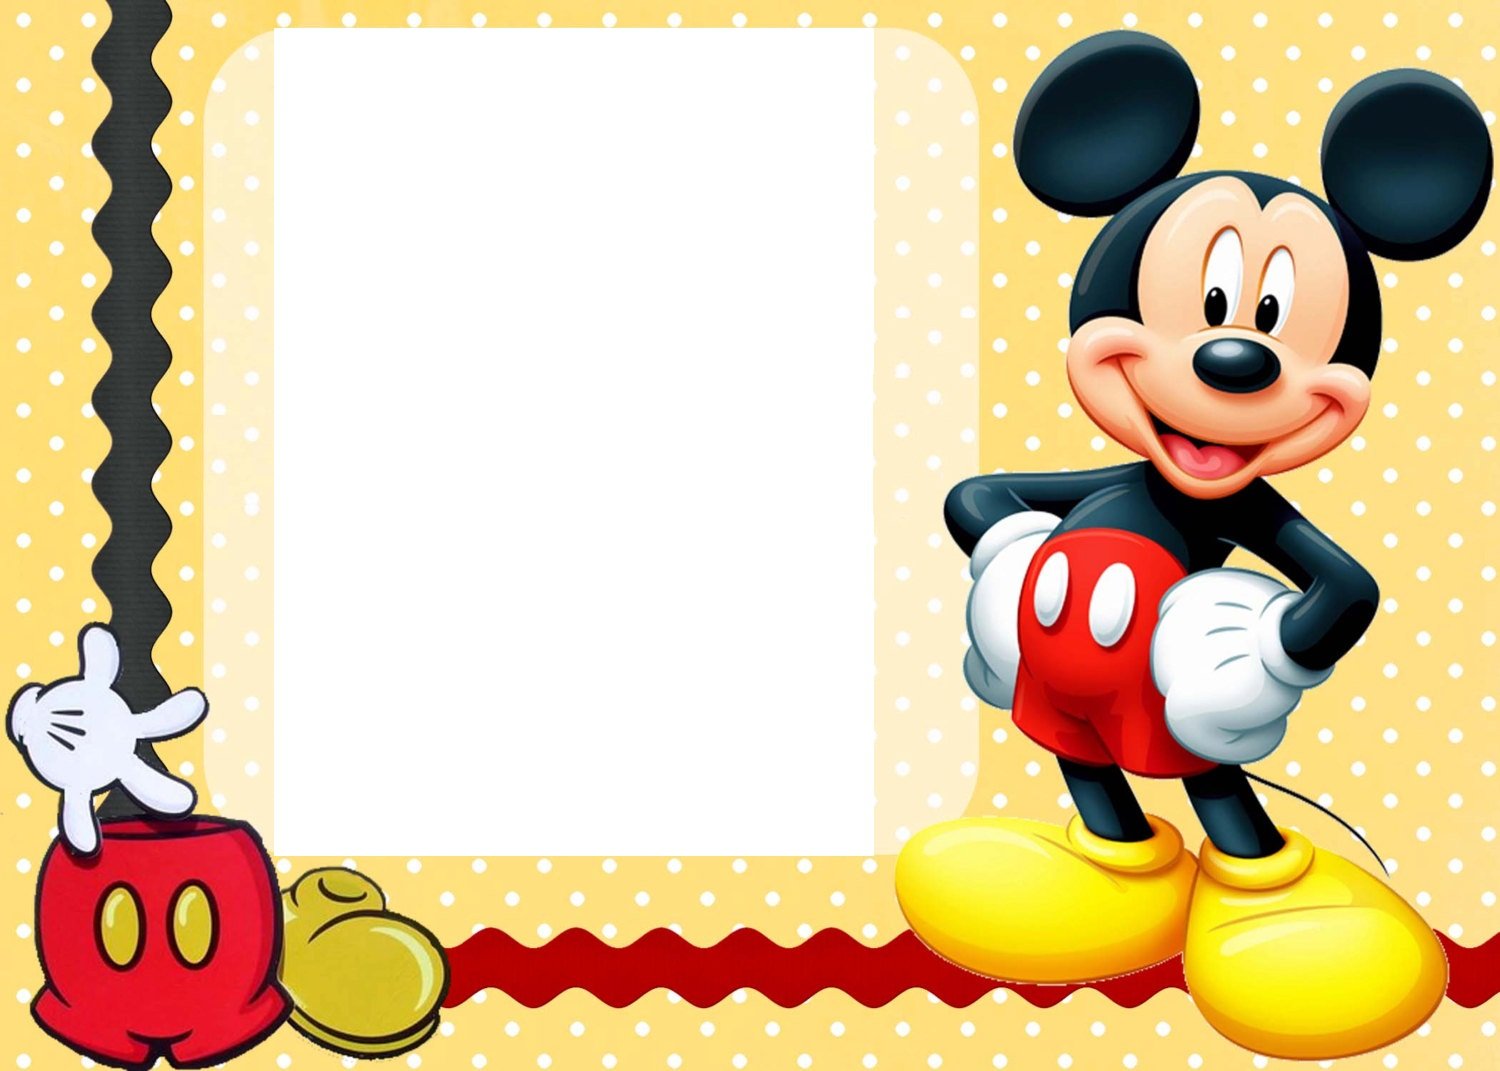 1000+ Ideas About Mickey Mouse Clubhouse Invitations On Pinterest